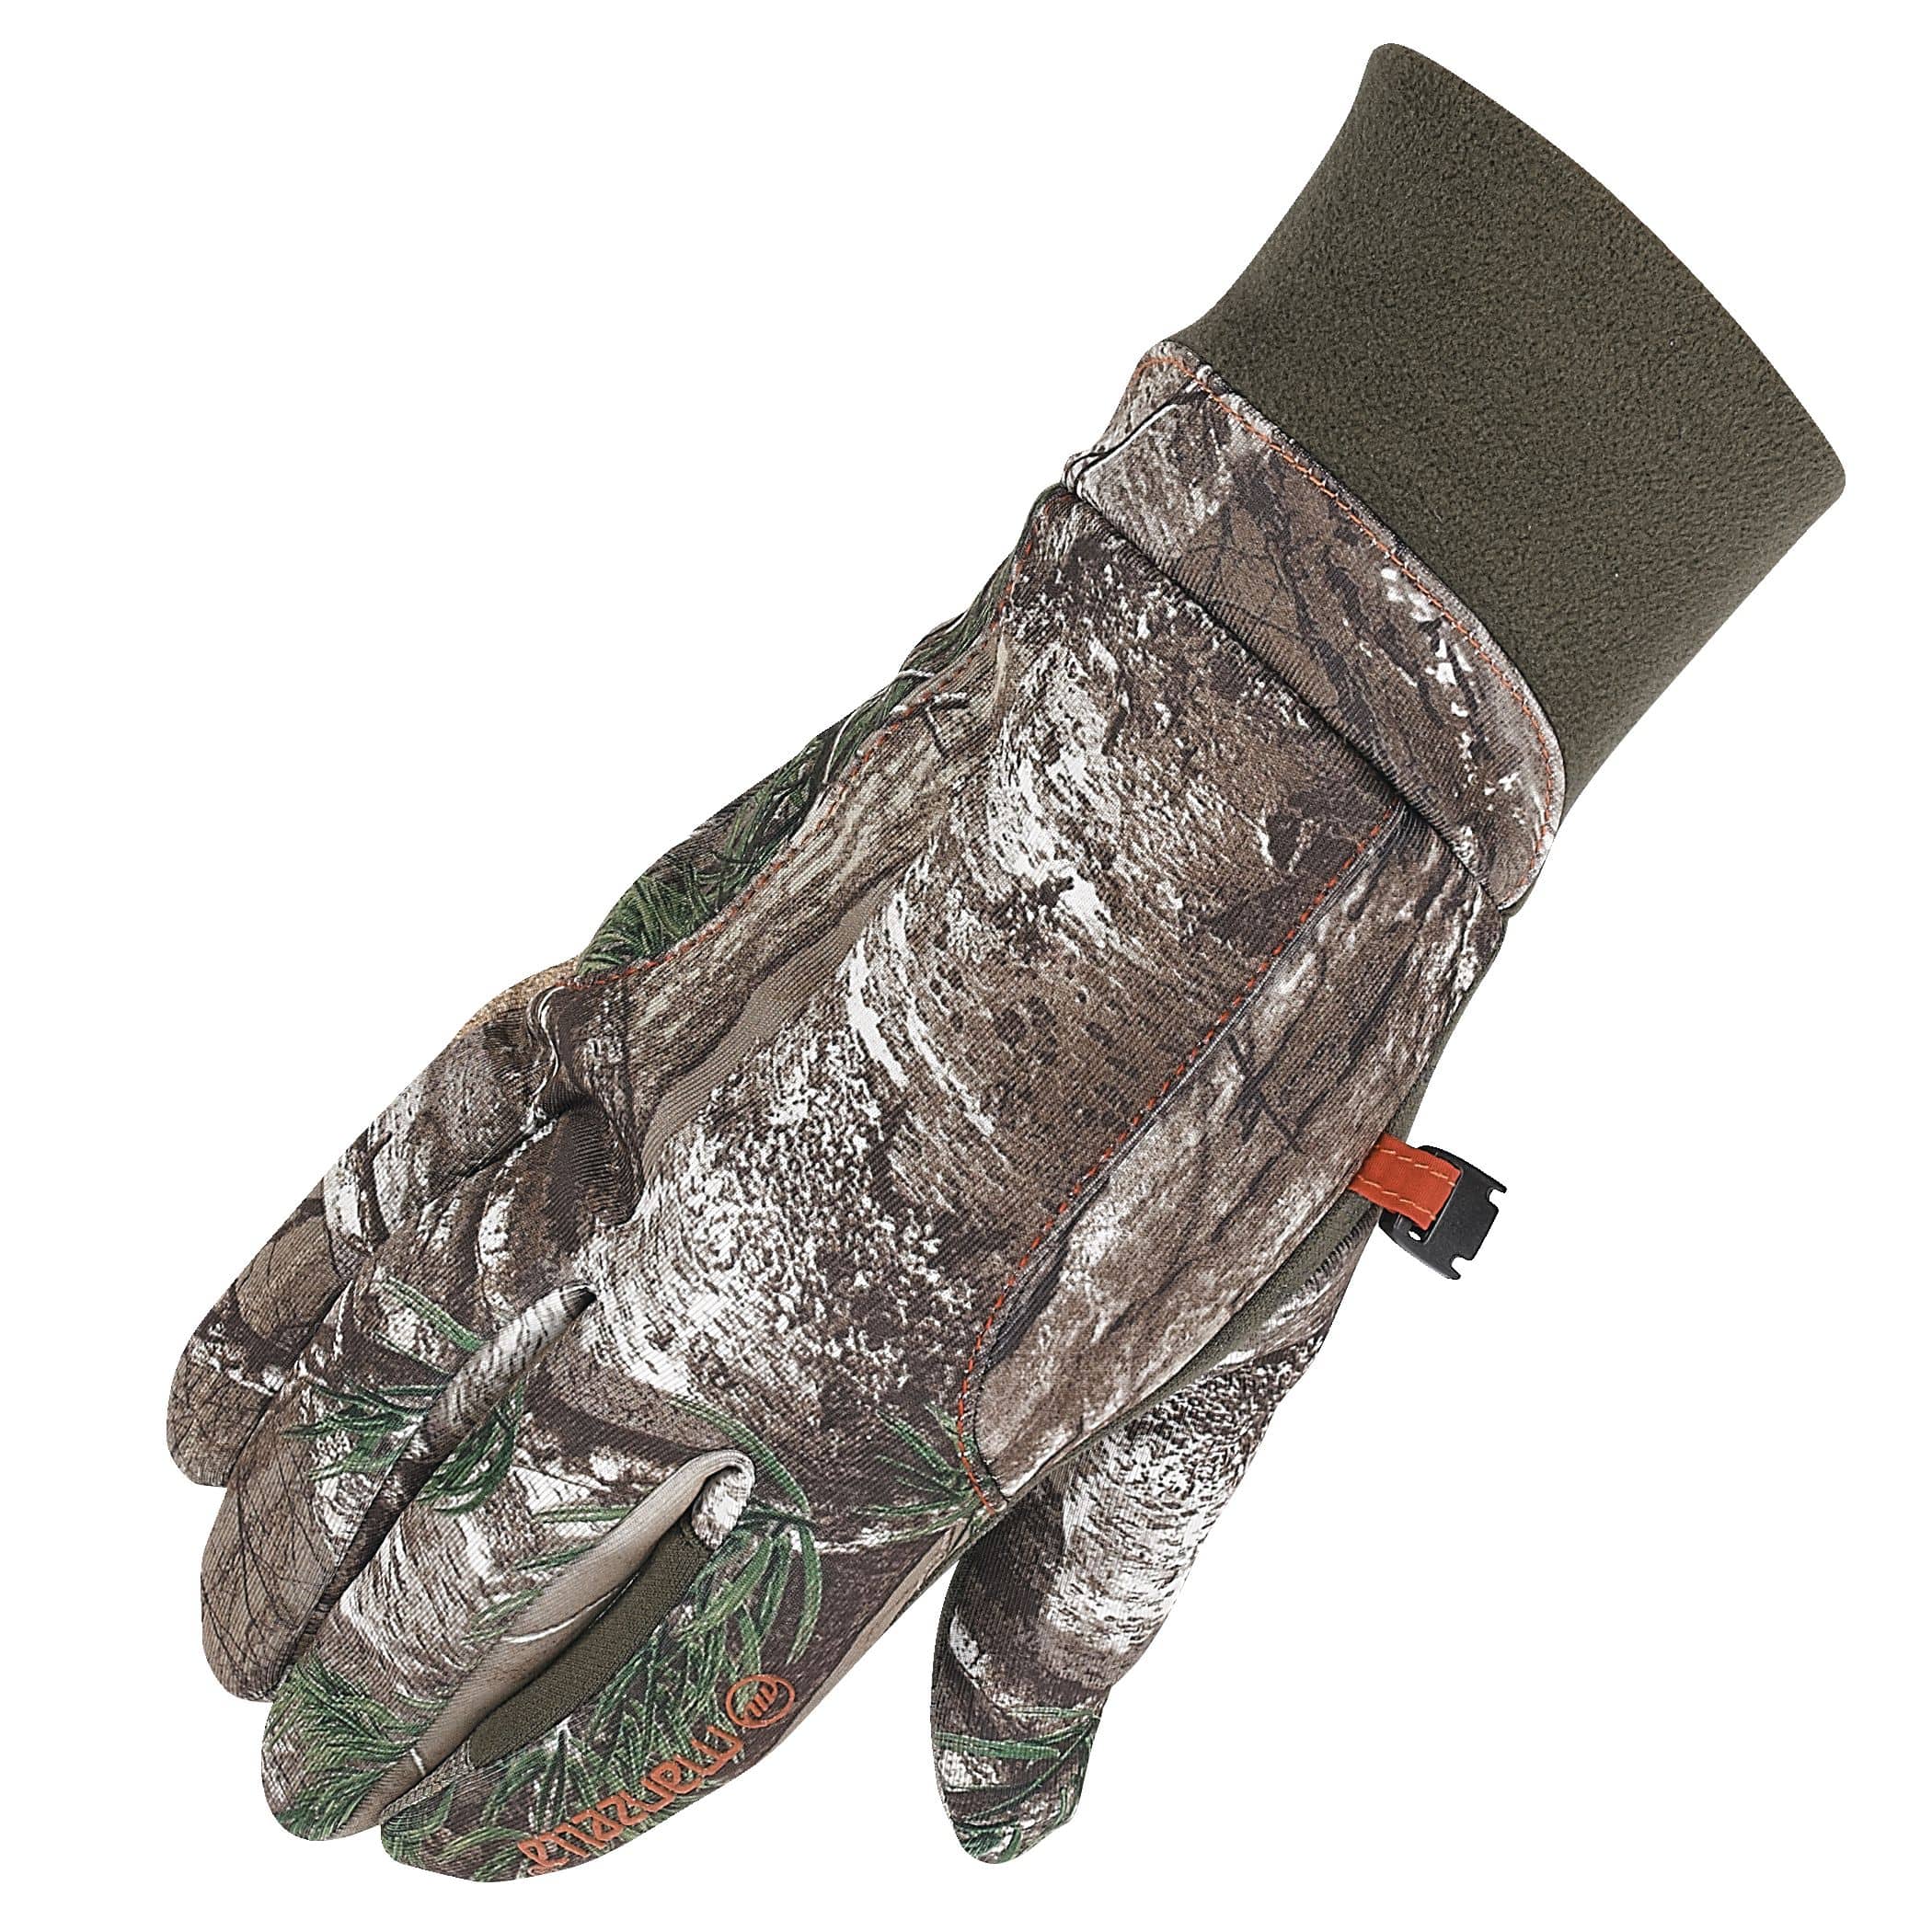 Manzella Waterfowl Shooter WaterProof Hunting Gloves, Lined for Warmth,  Realtree Max5 Camo